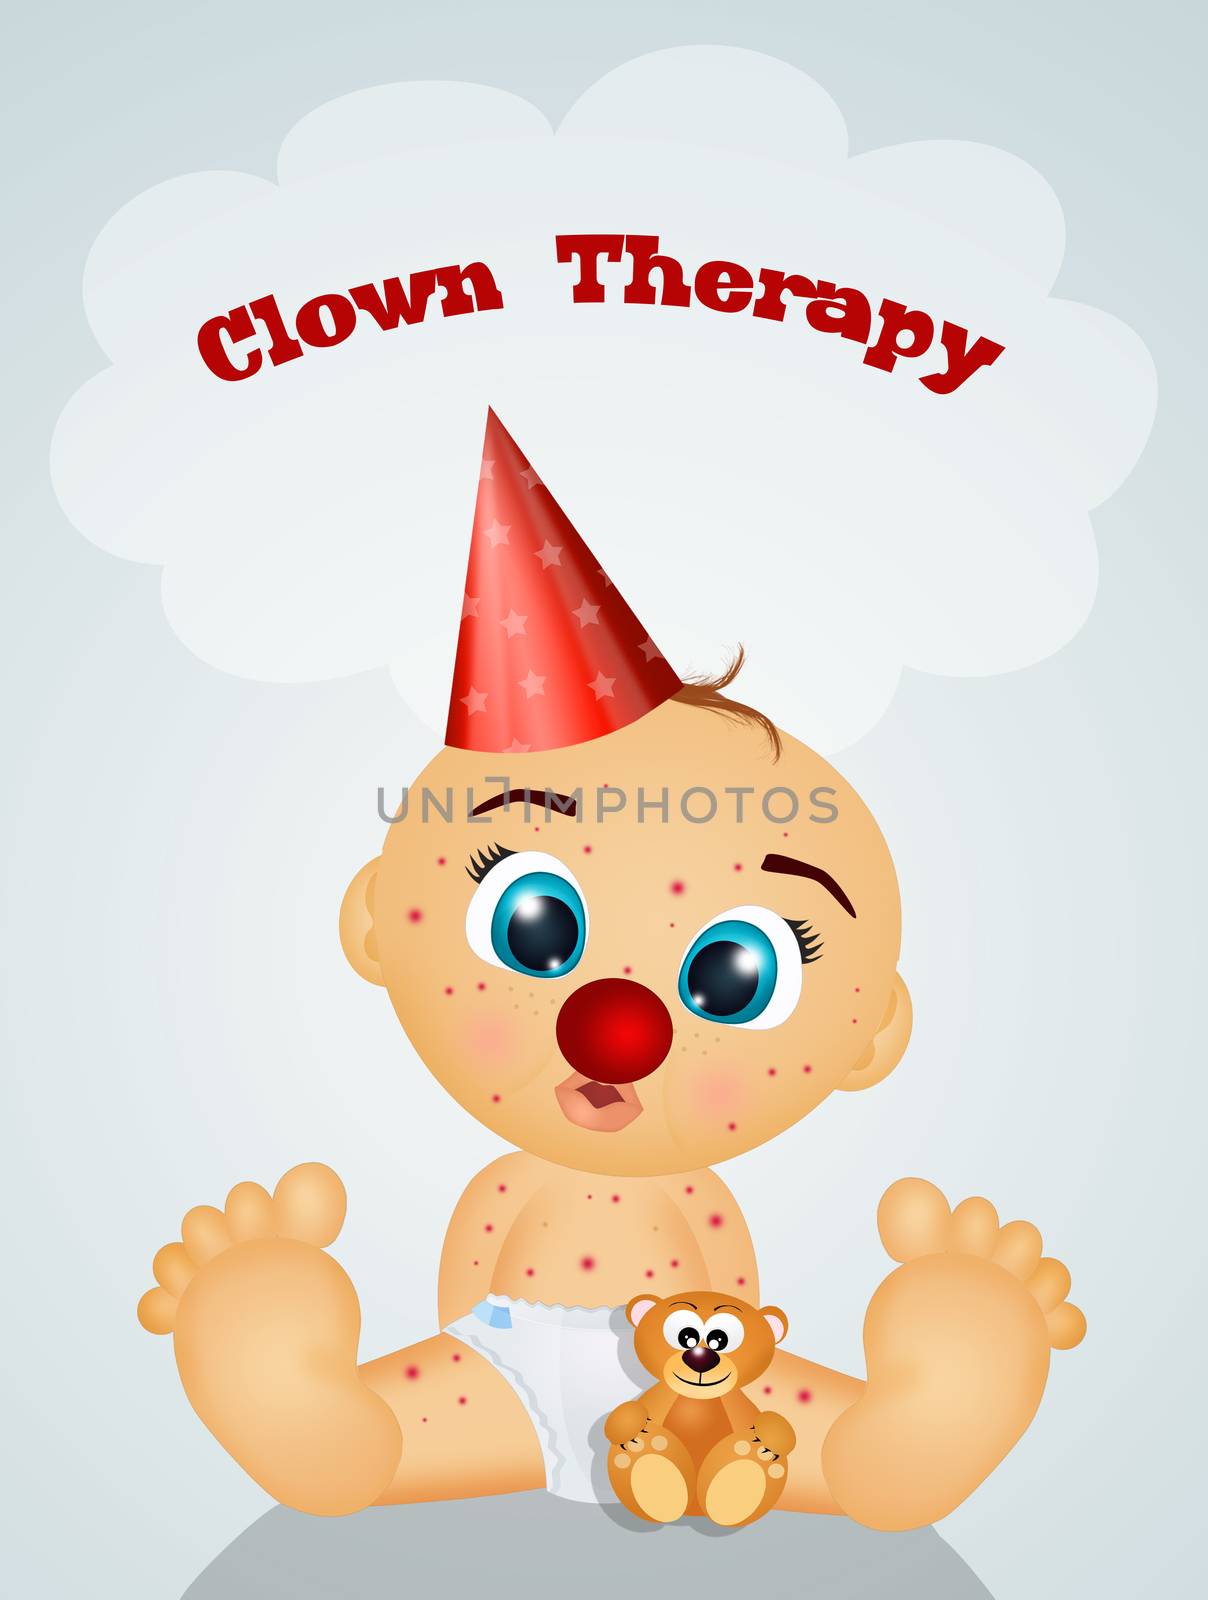 illustration of clown therapy by adrenalina